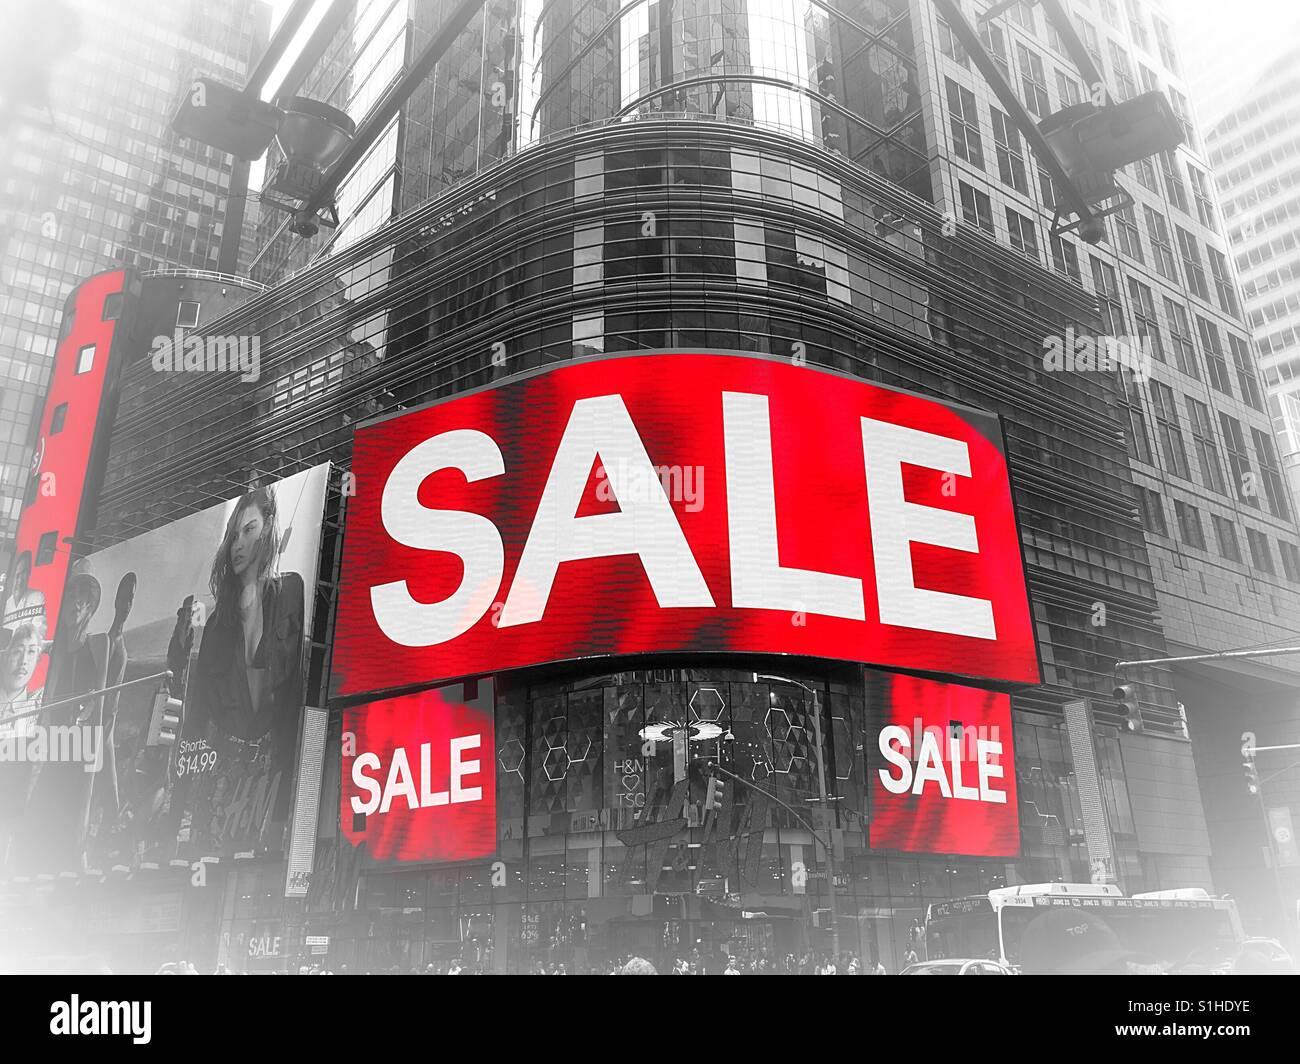 Huge LED display screen "sale" at H&M department store in times square,  NYC, USA Stock Photo - Alamy